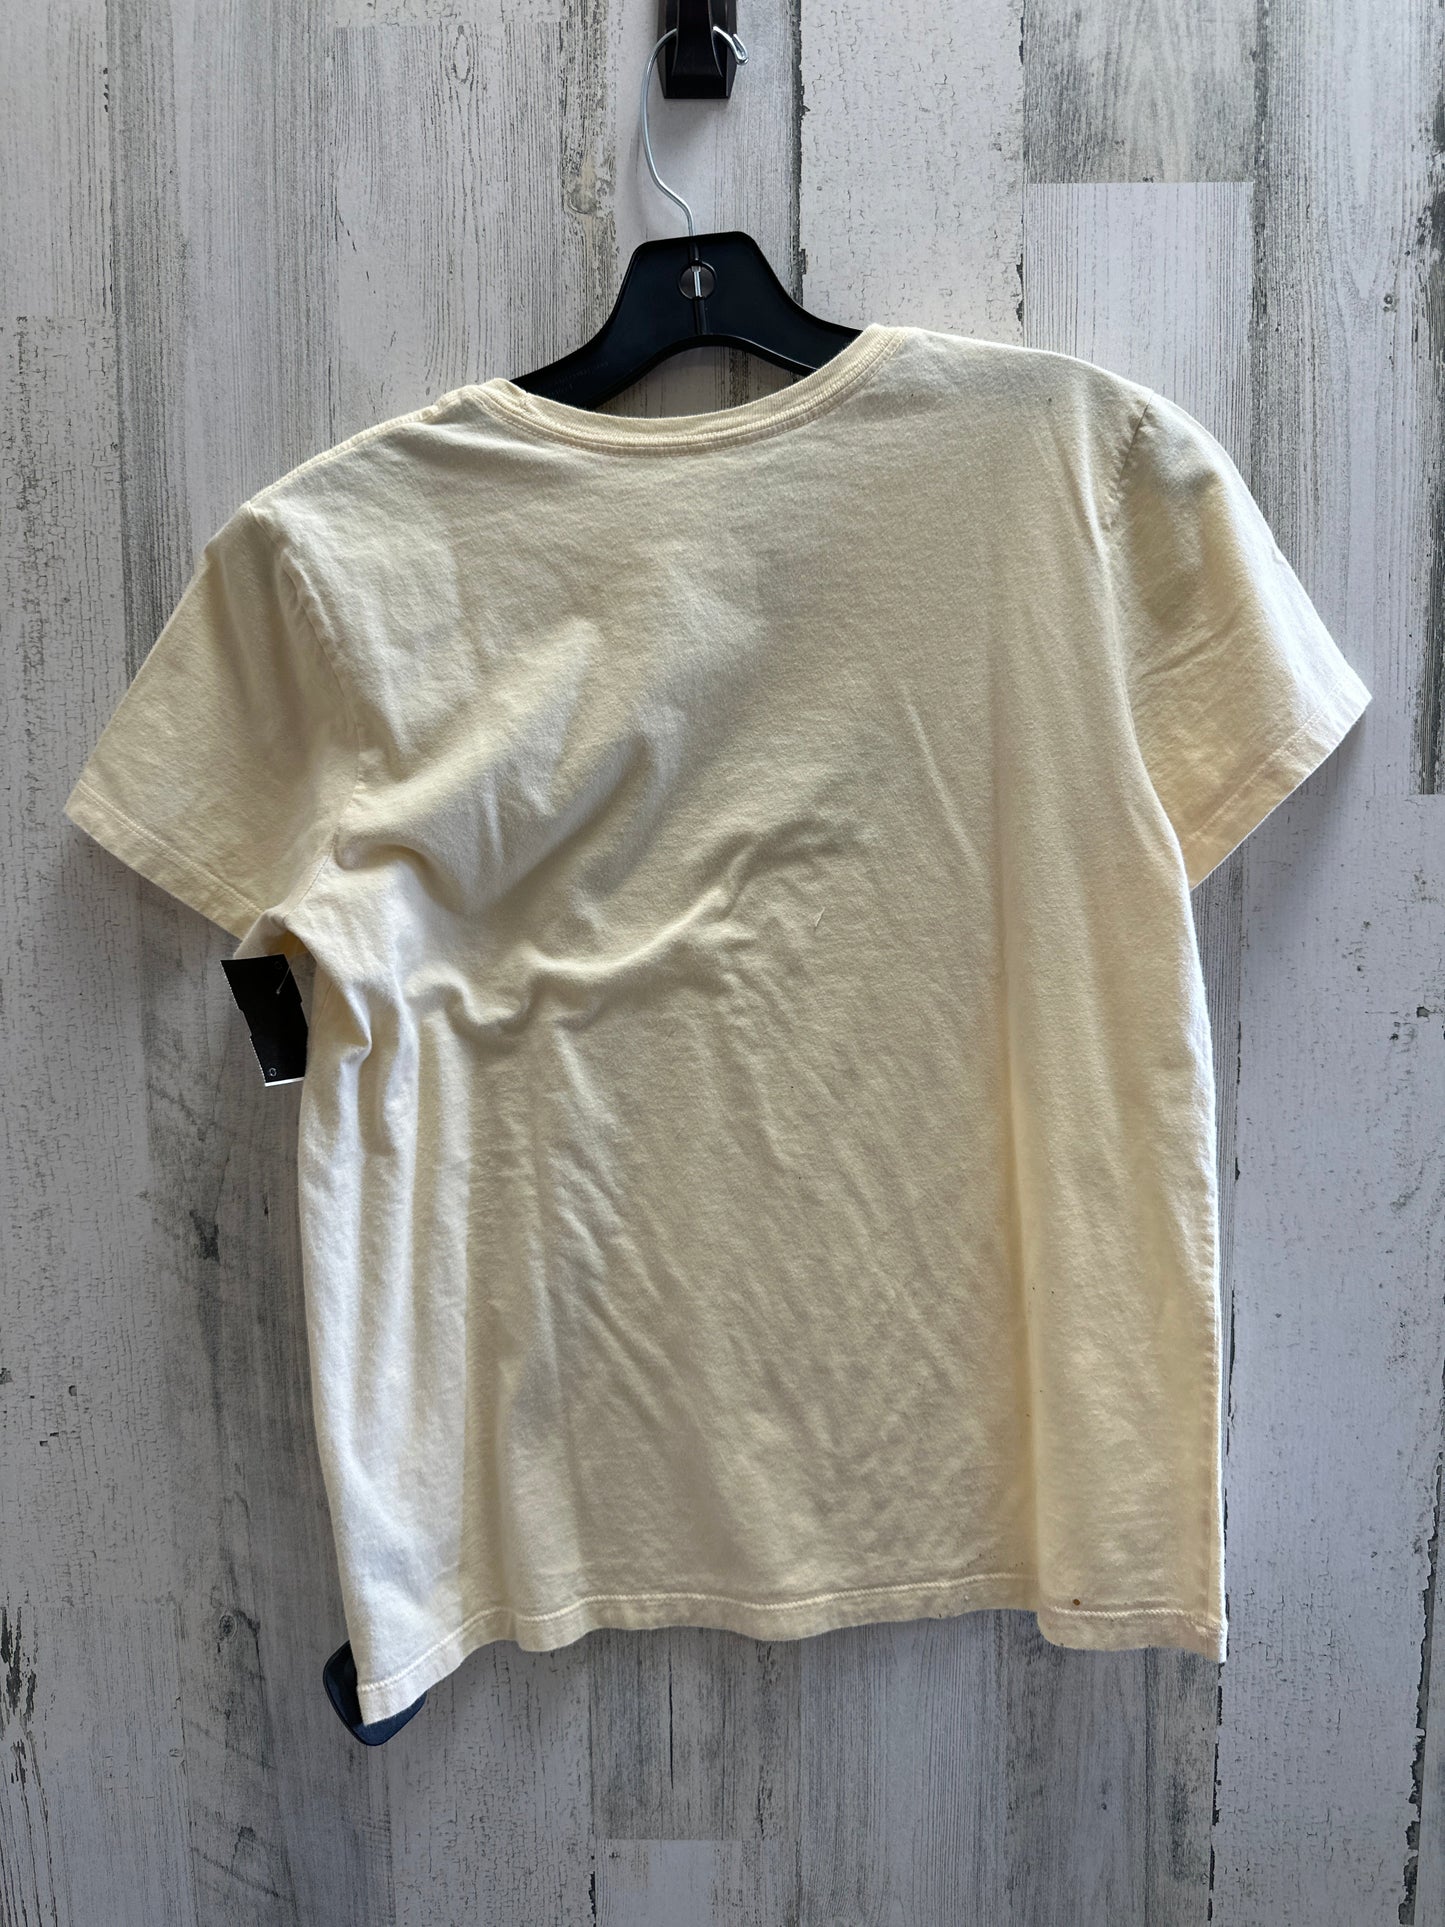 Yellow Top Short Sleeve Patagonia, Size Xs